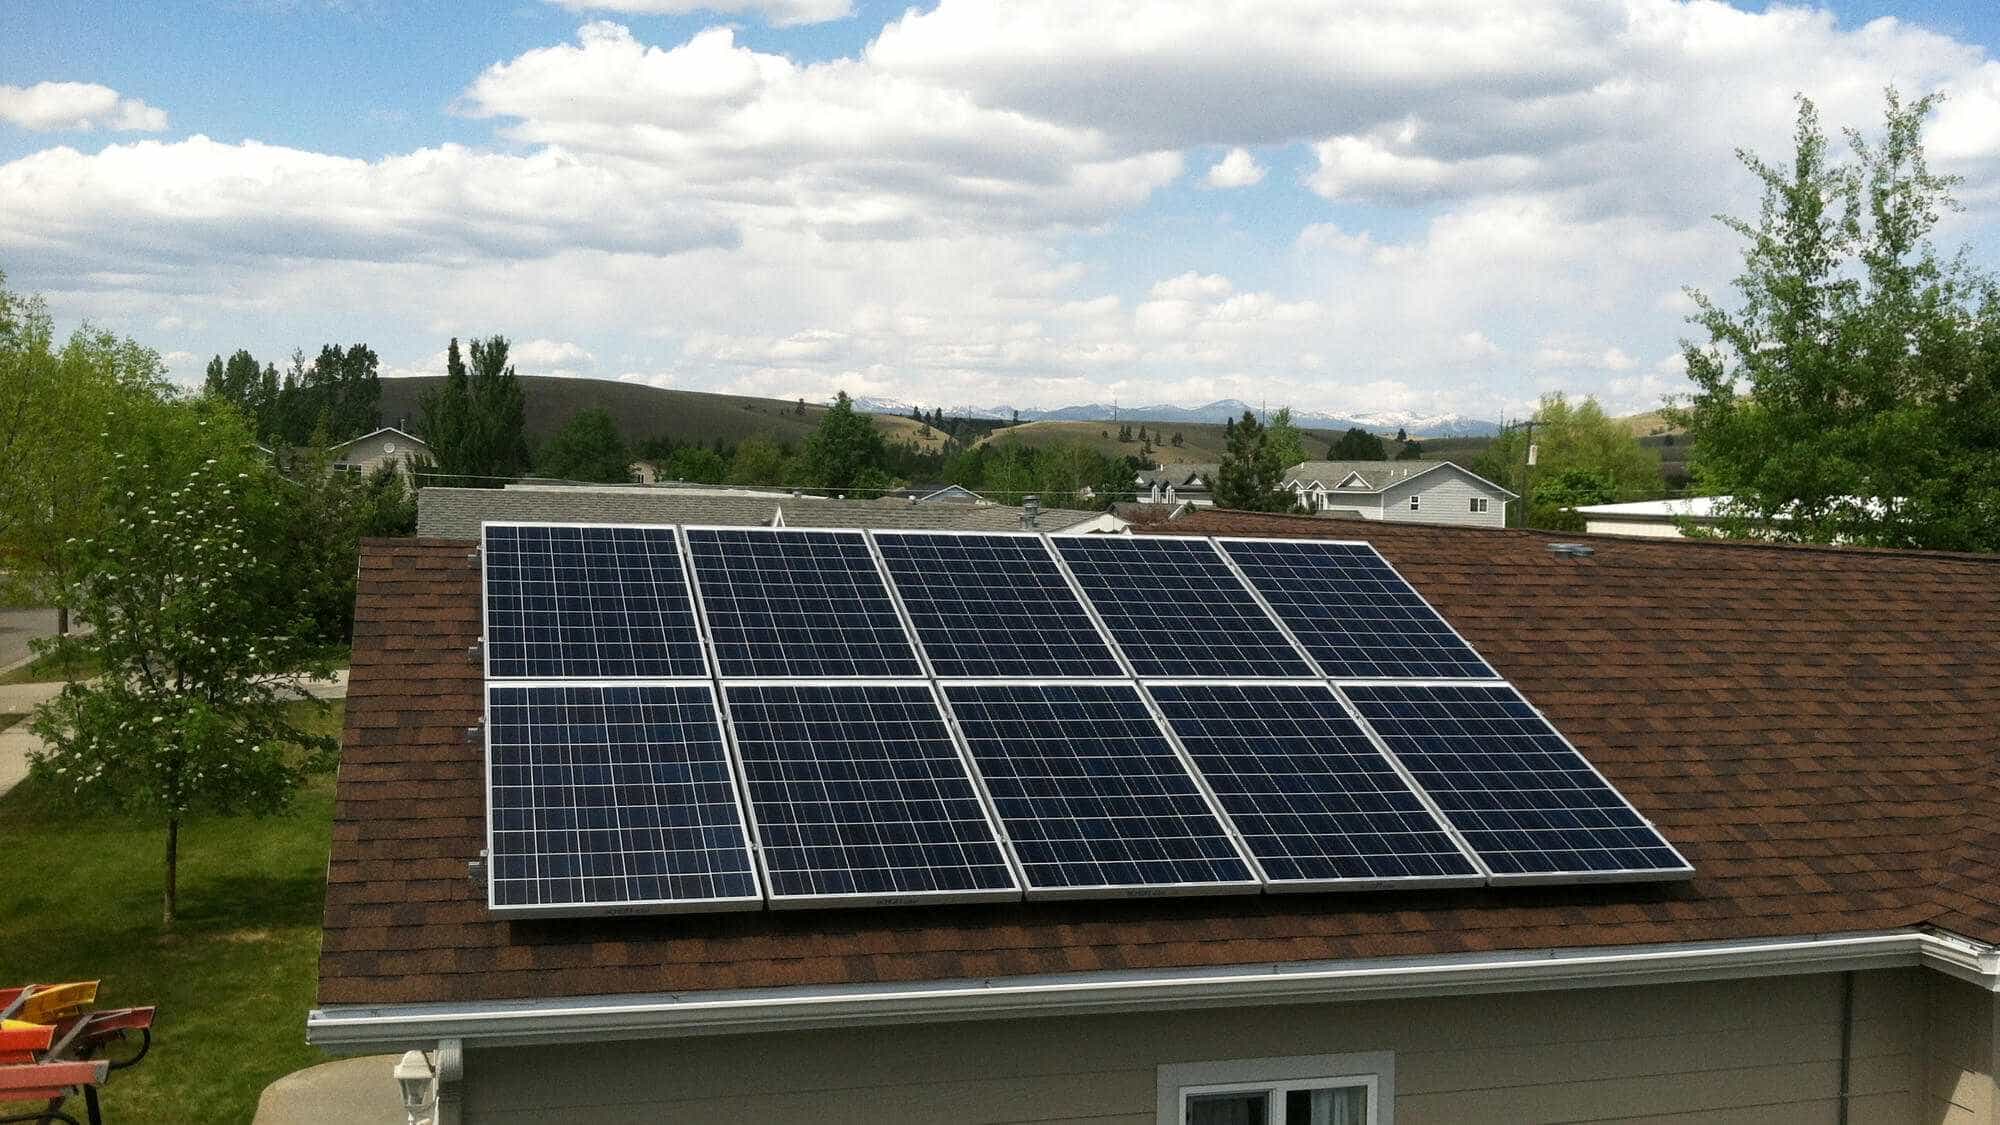 Solar panels on roof in Lolo, Montanna